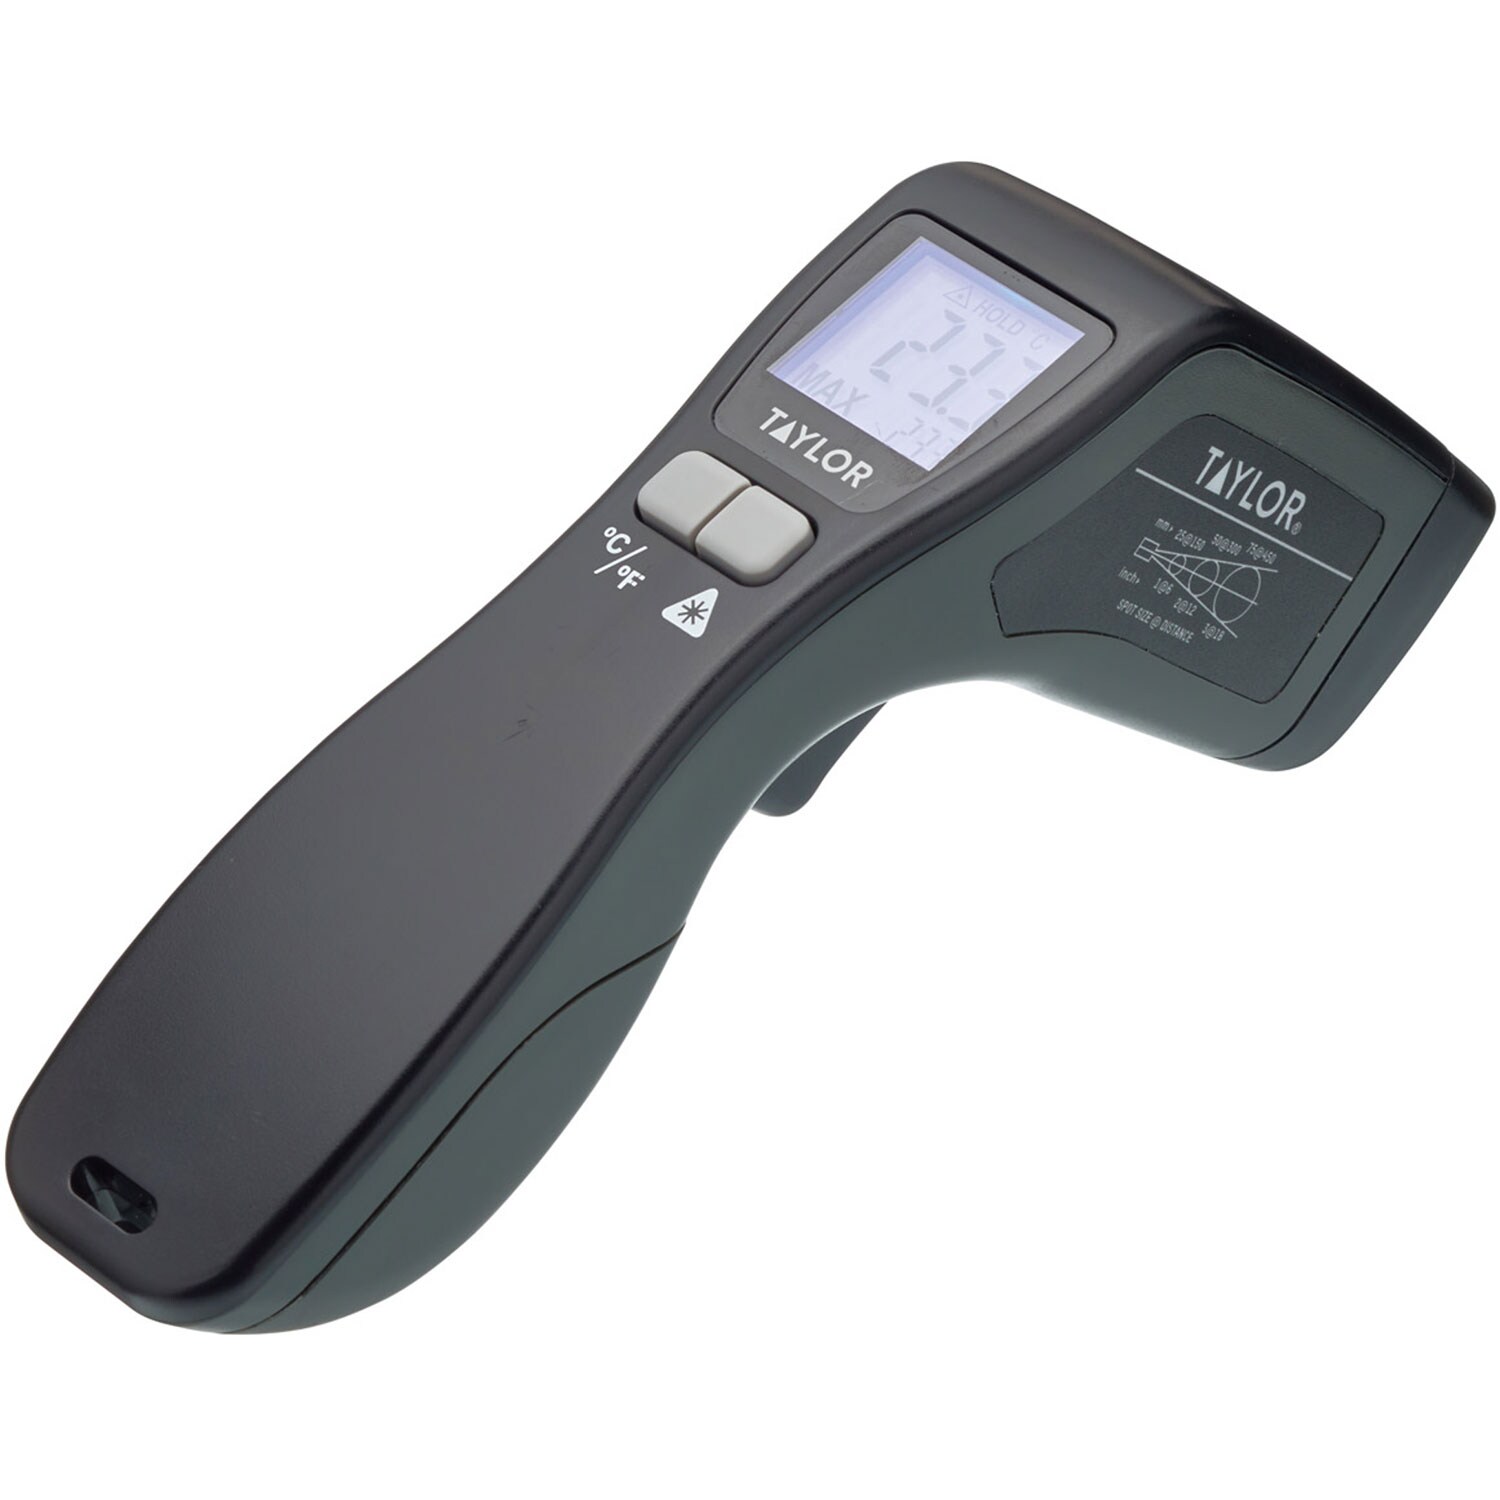 https://royaldesign.com/image/2/kitchen-craft-taylor-pro-infrared-thermometer-blister-packed-0